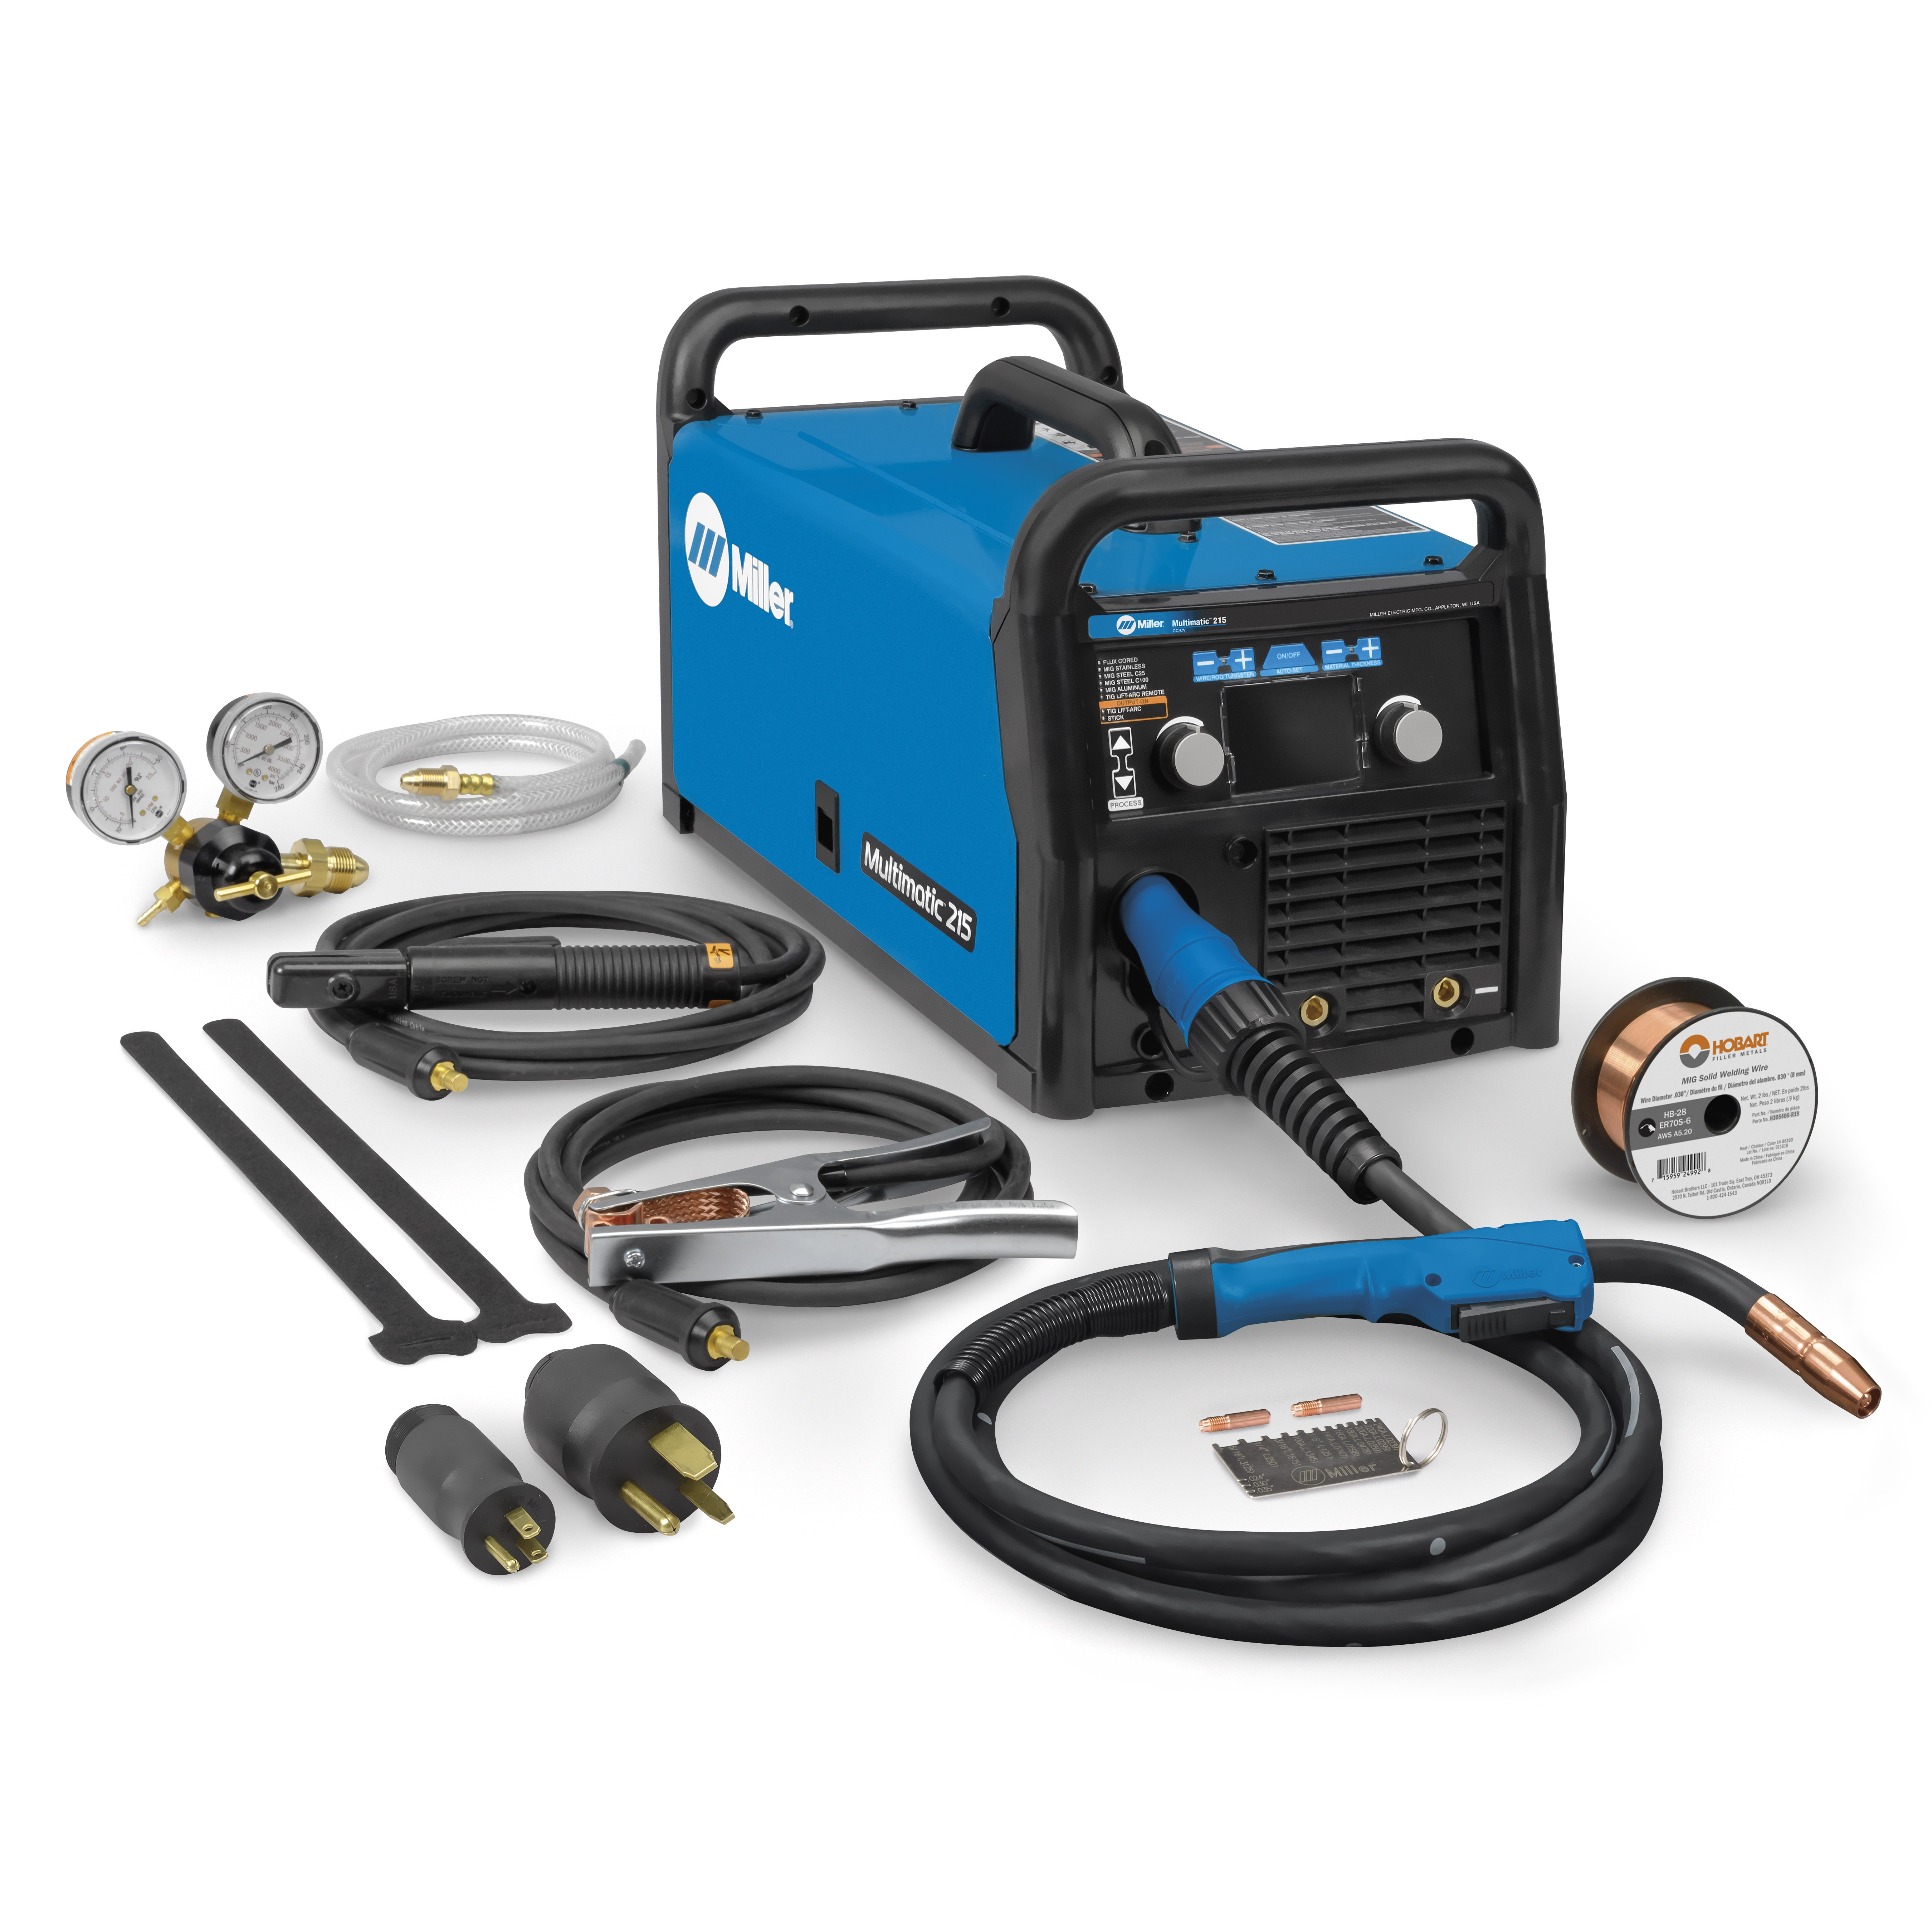 Multimatic 215 Multiprocess Welder with TIG Kit